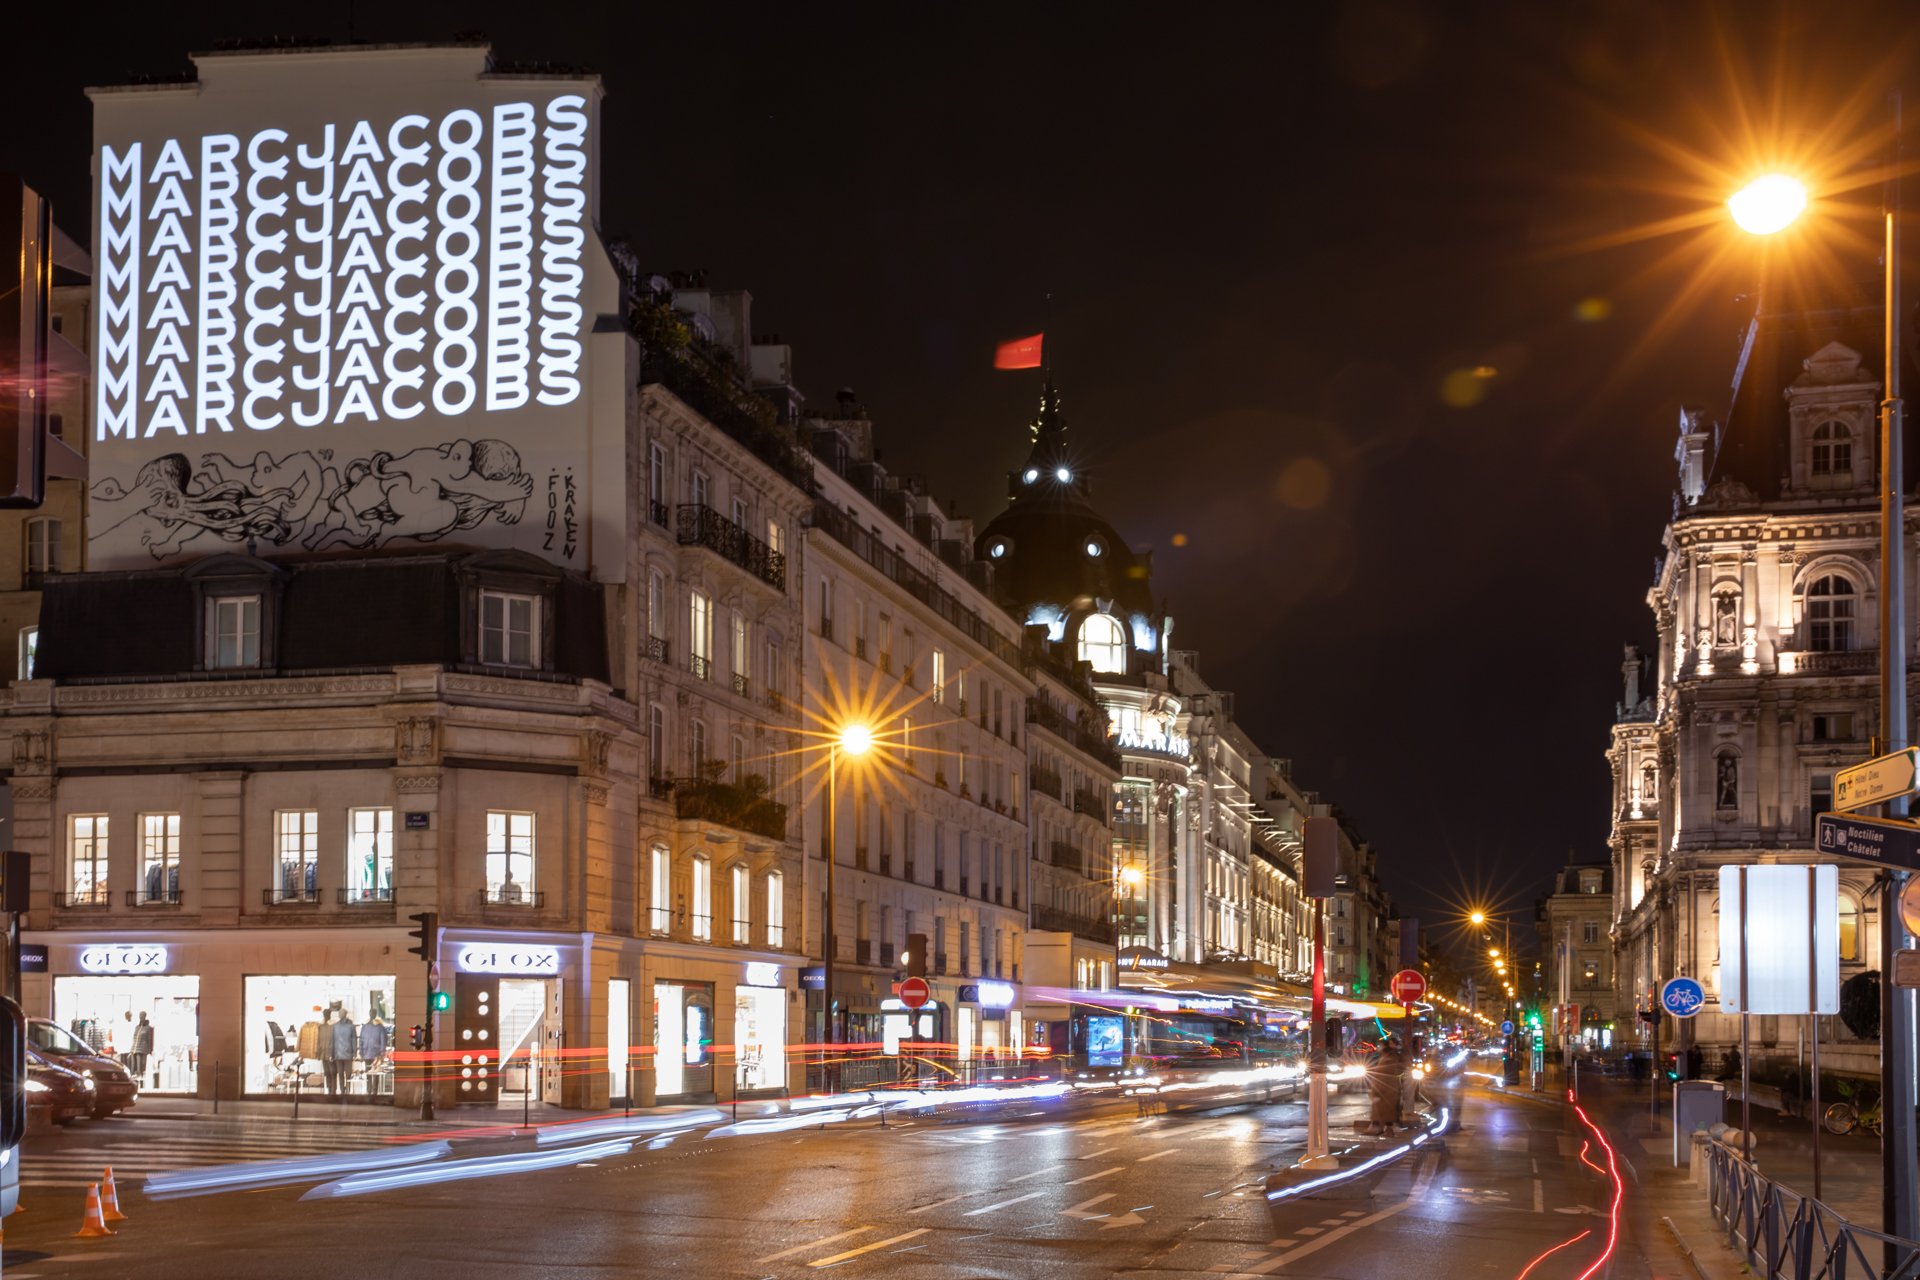 Marc Jacobs Paris By Night January 2022 by Alexis Jacquin @alexisjacq1-186_web.jpg